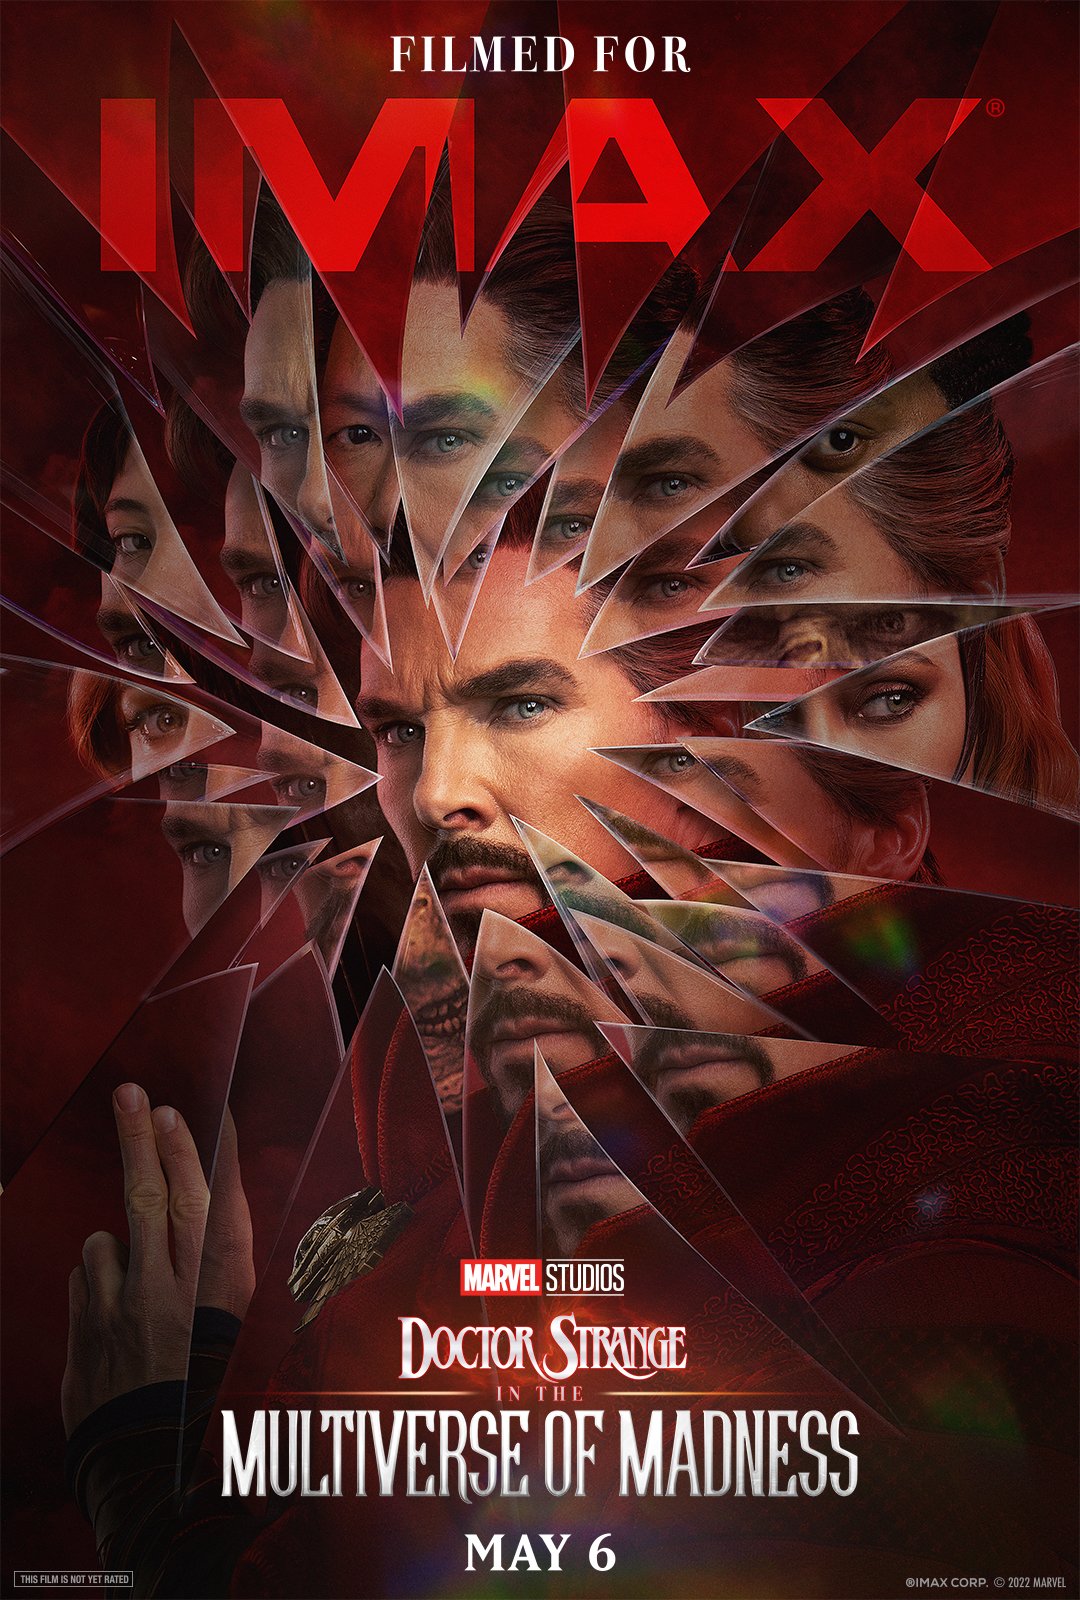 Doctor Strange in the Multiverse of Madness Posters